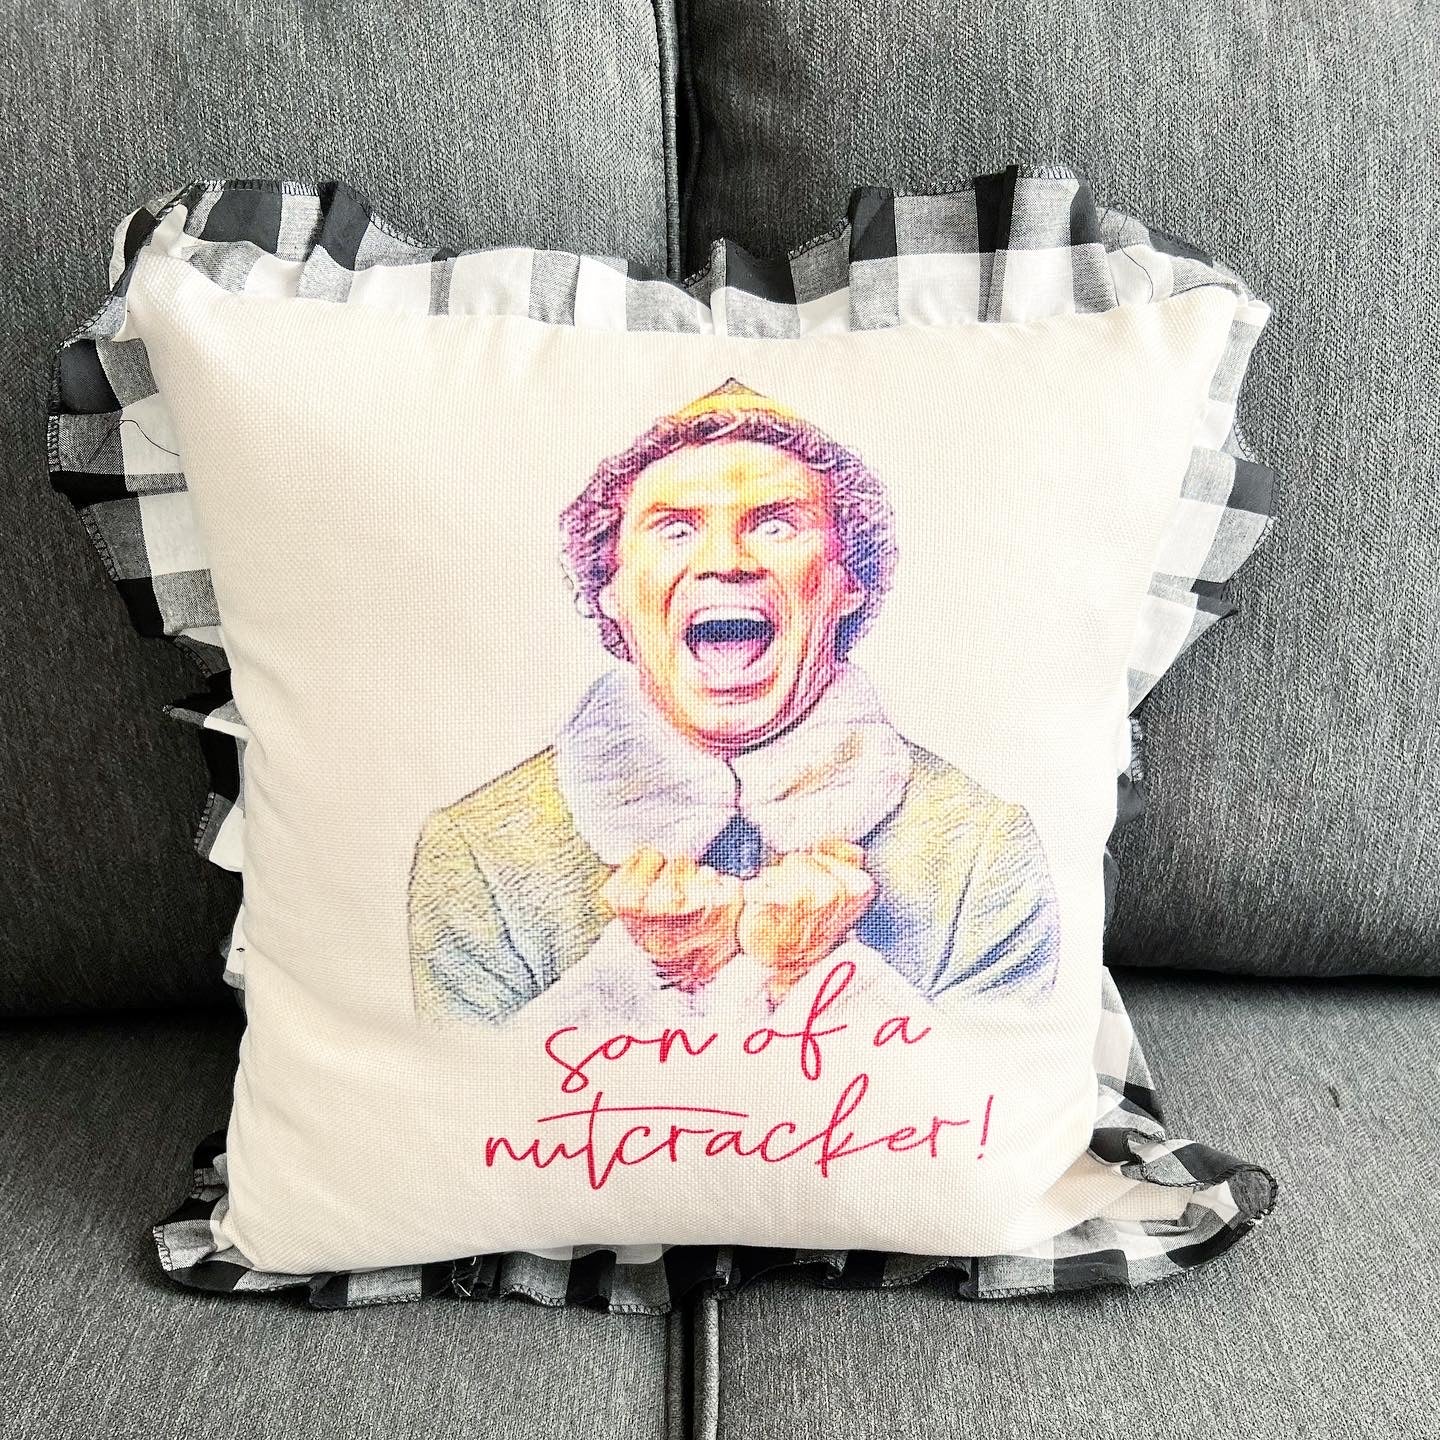 The Pillow Collection